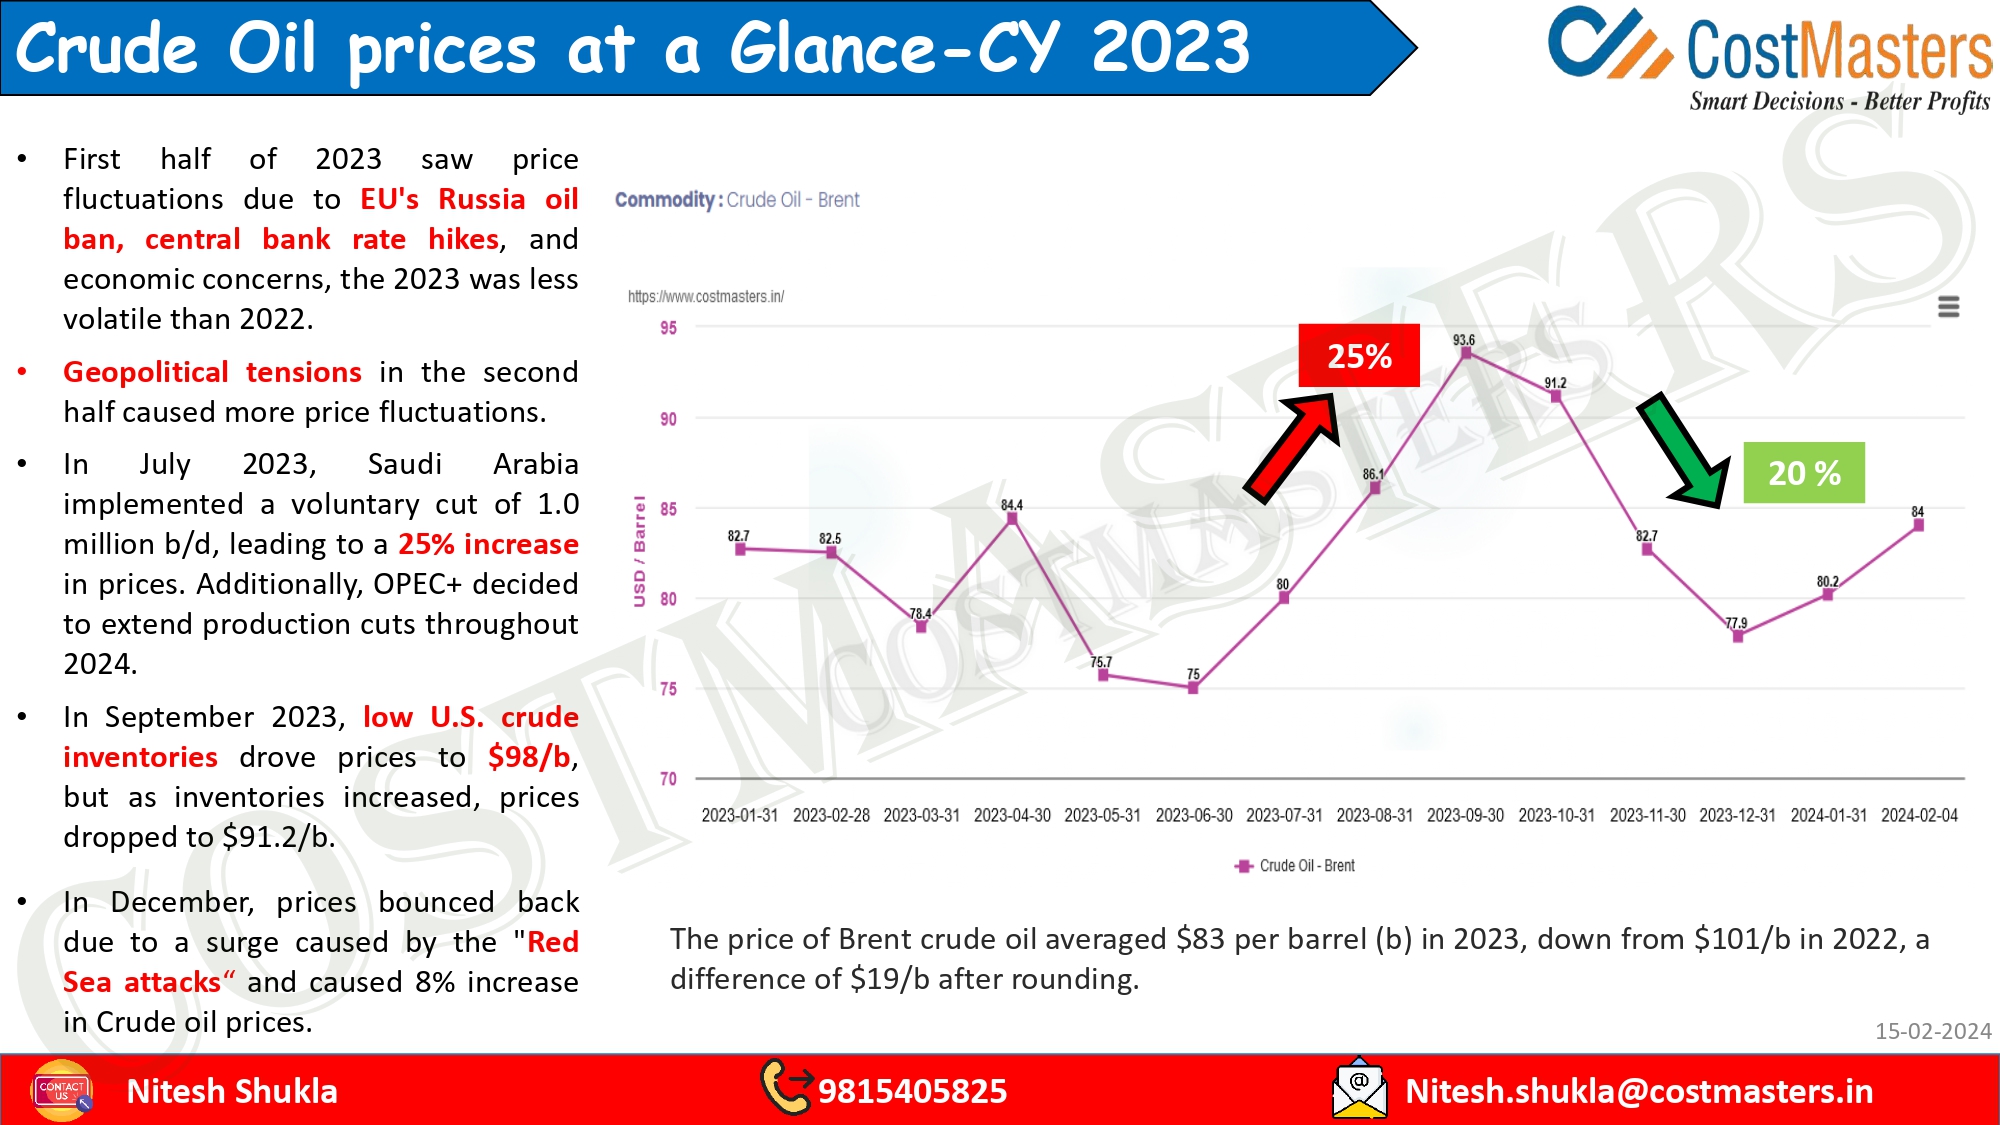 Crude Oil Prices at a Glance-CY 2023